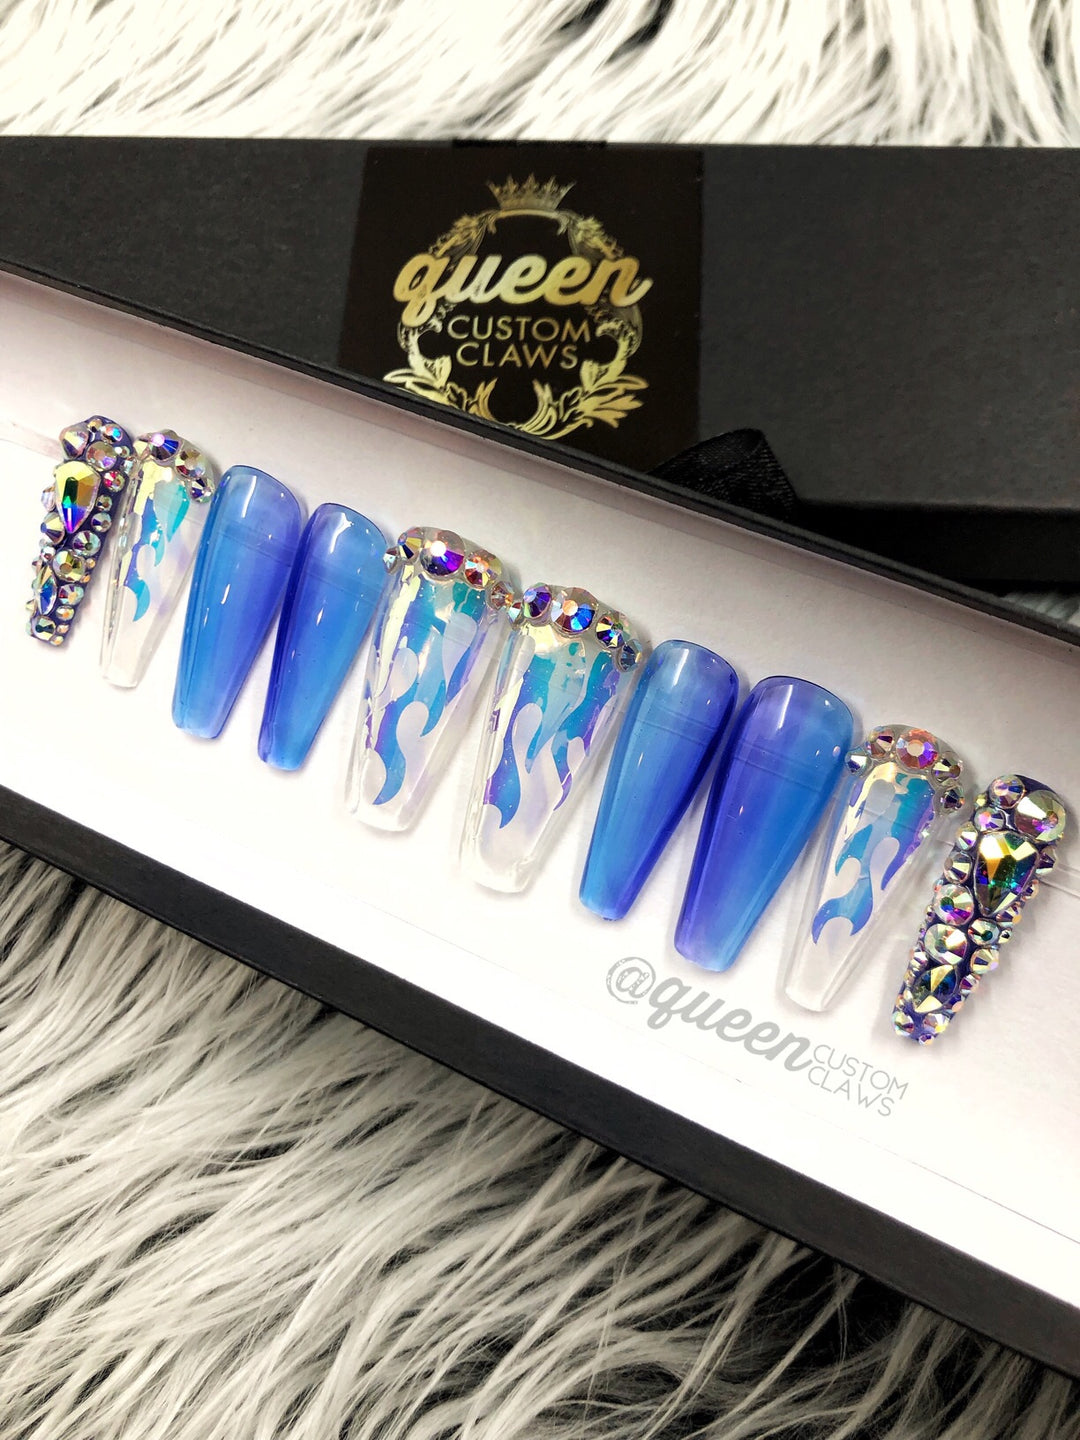 Fire & Ice - press-on nails